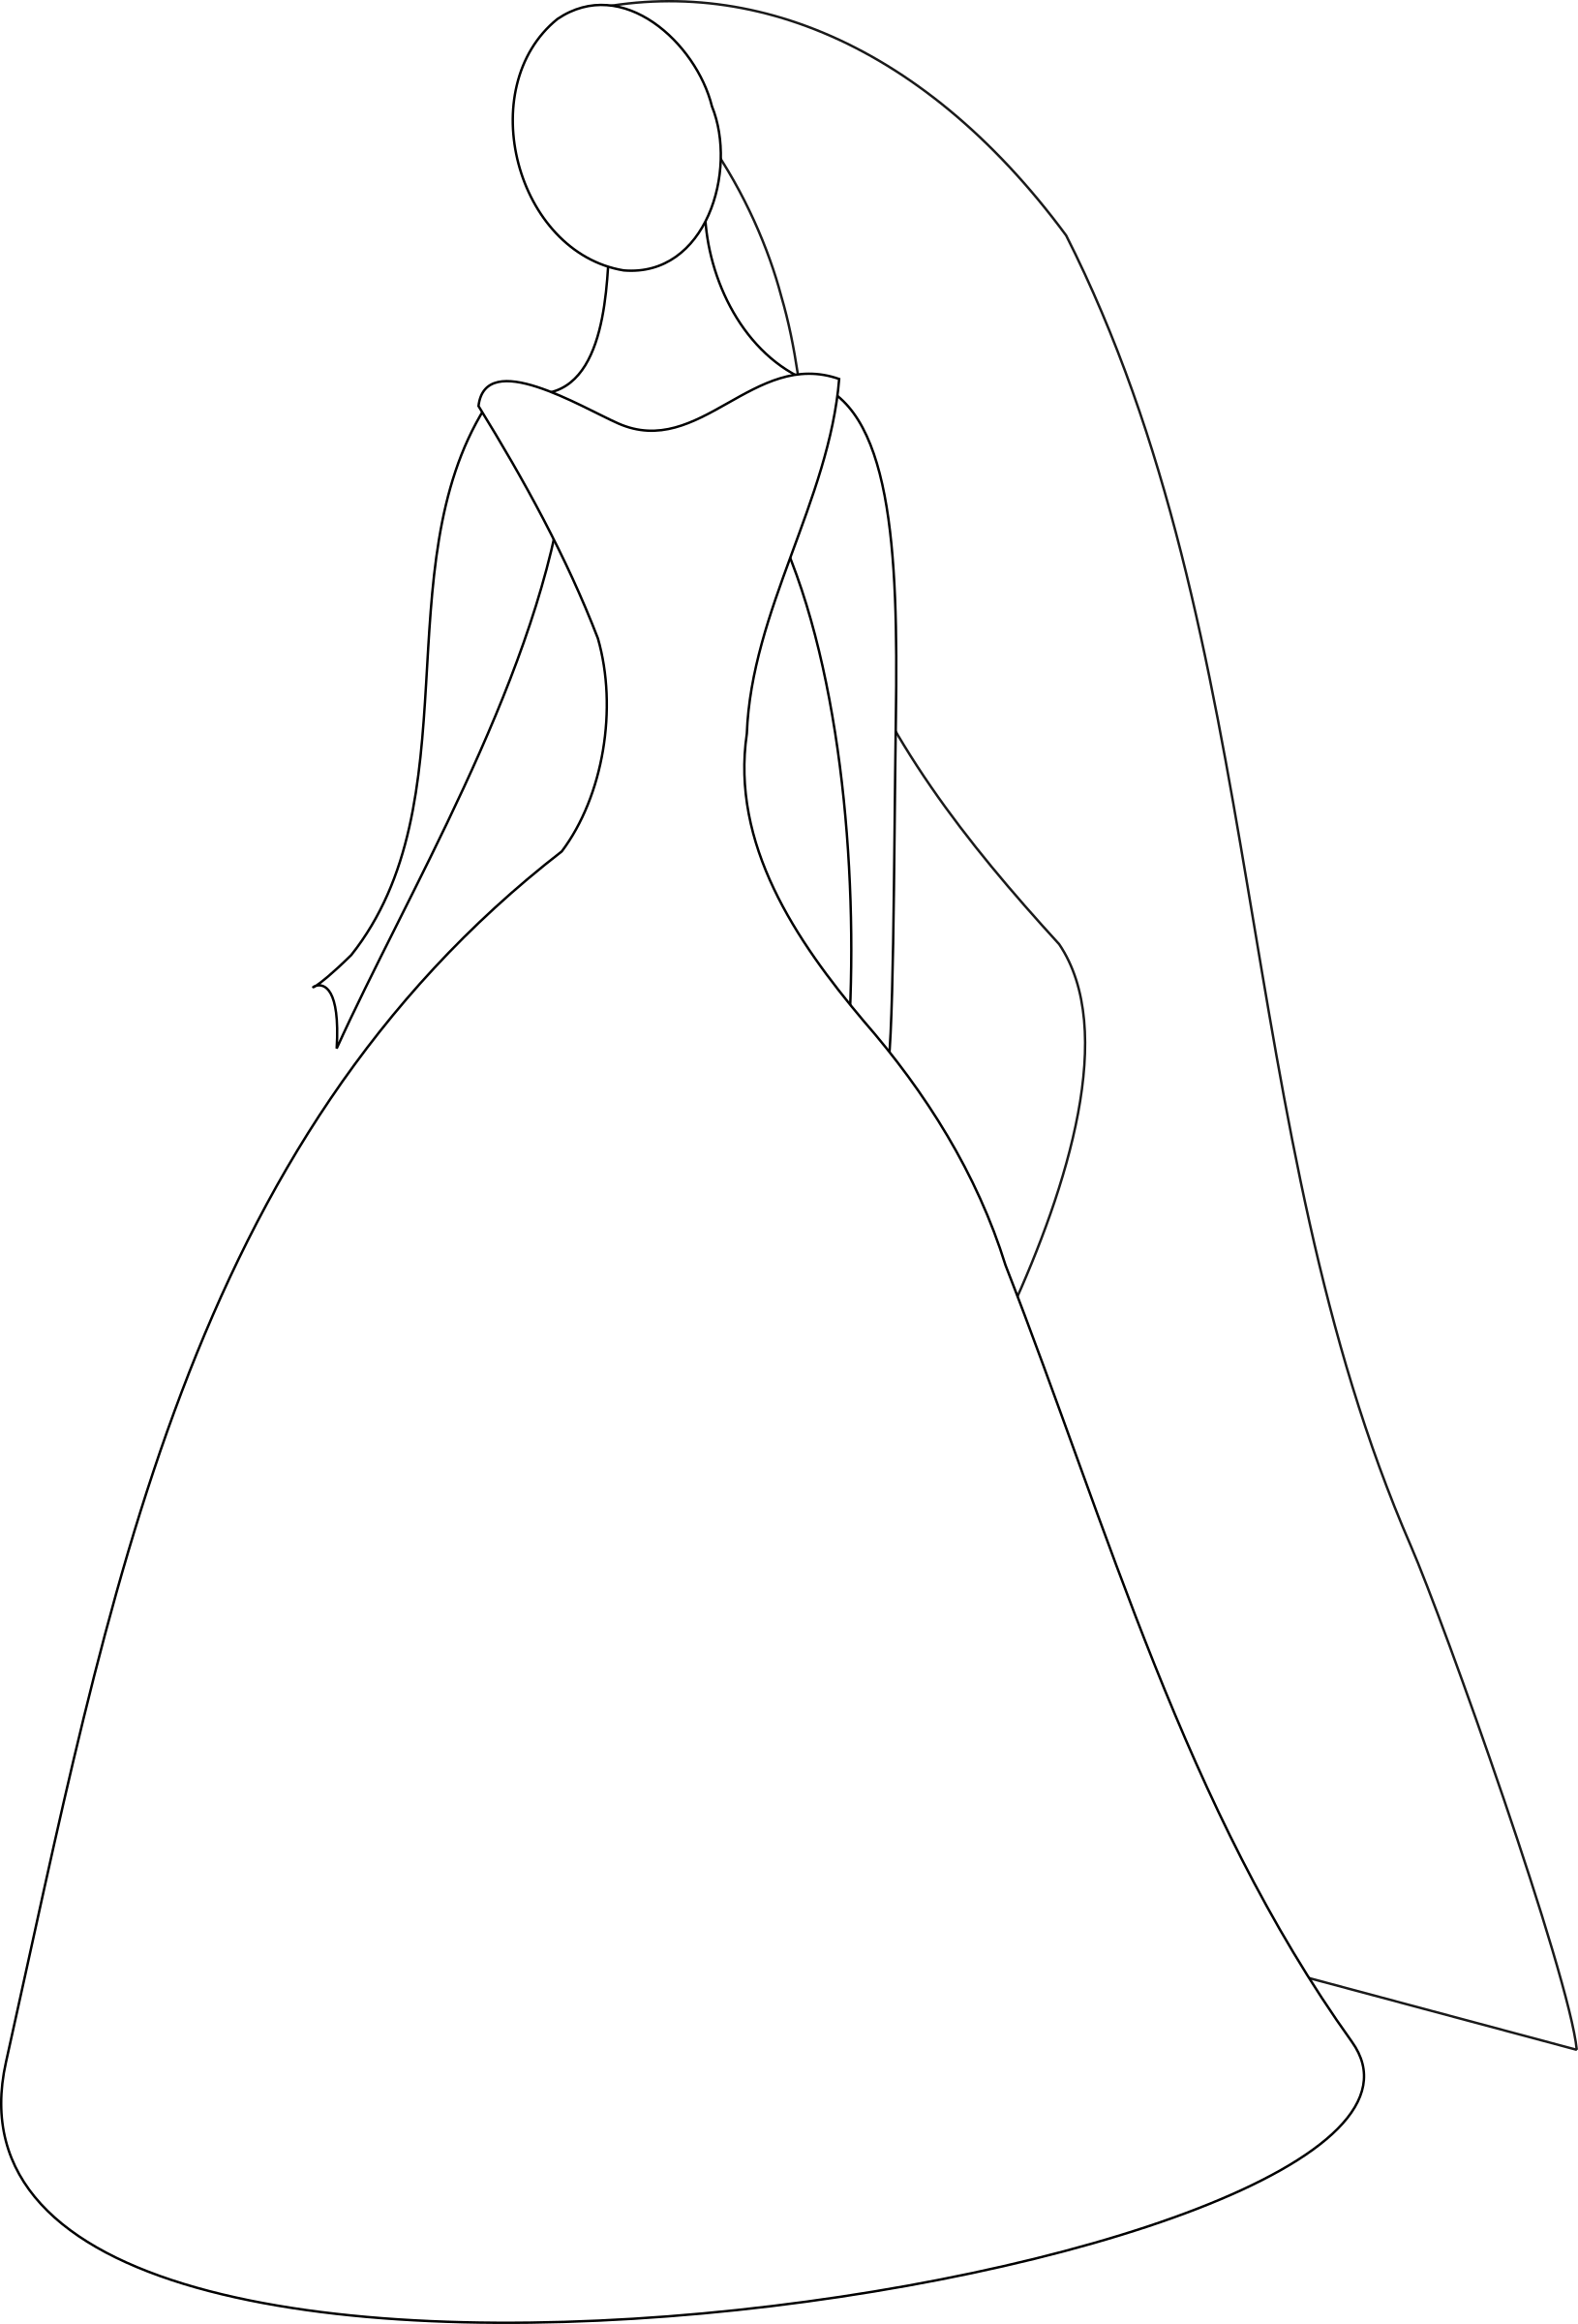 Bride Dress Hd Transparent, The Bride Wore A Wedding Dress, Clipart,  Wedding, Girl PNG Image For Free Download | Wedding dress illustrations, Wedding  dress sketches, Bride clipart